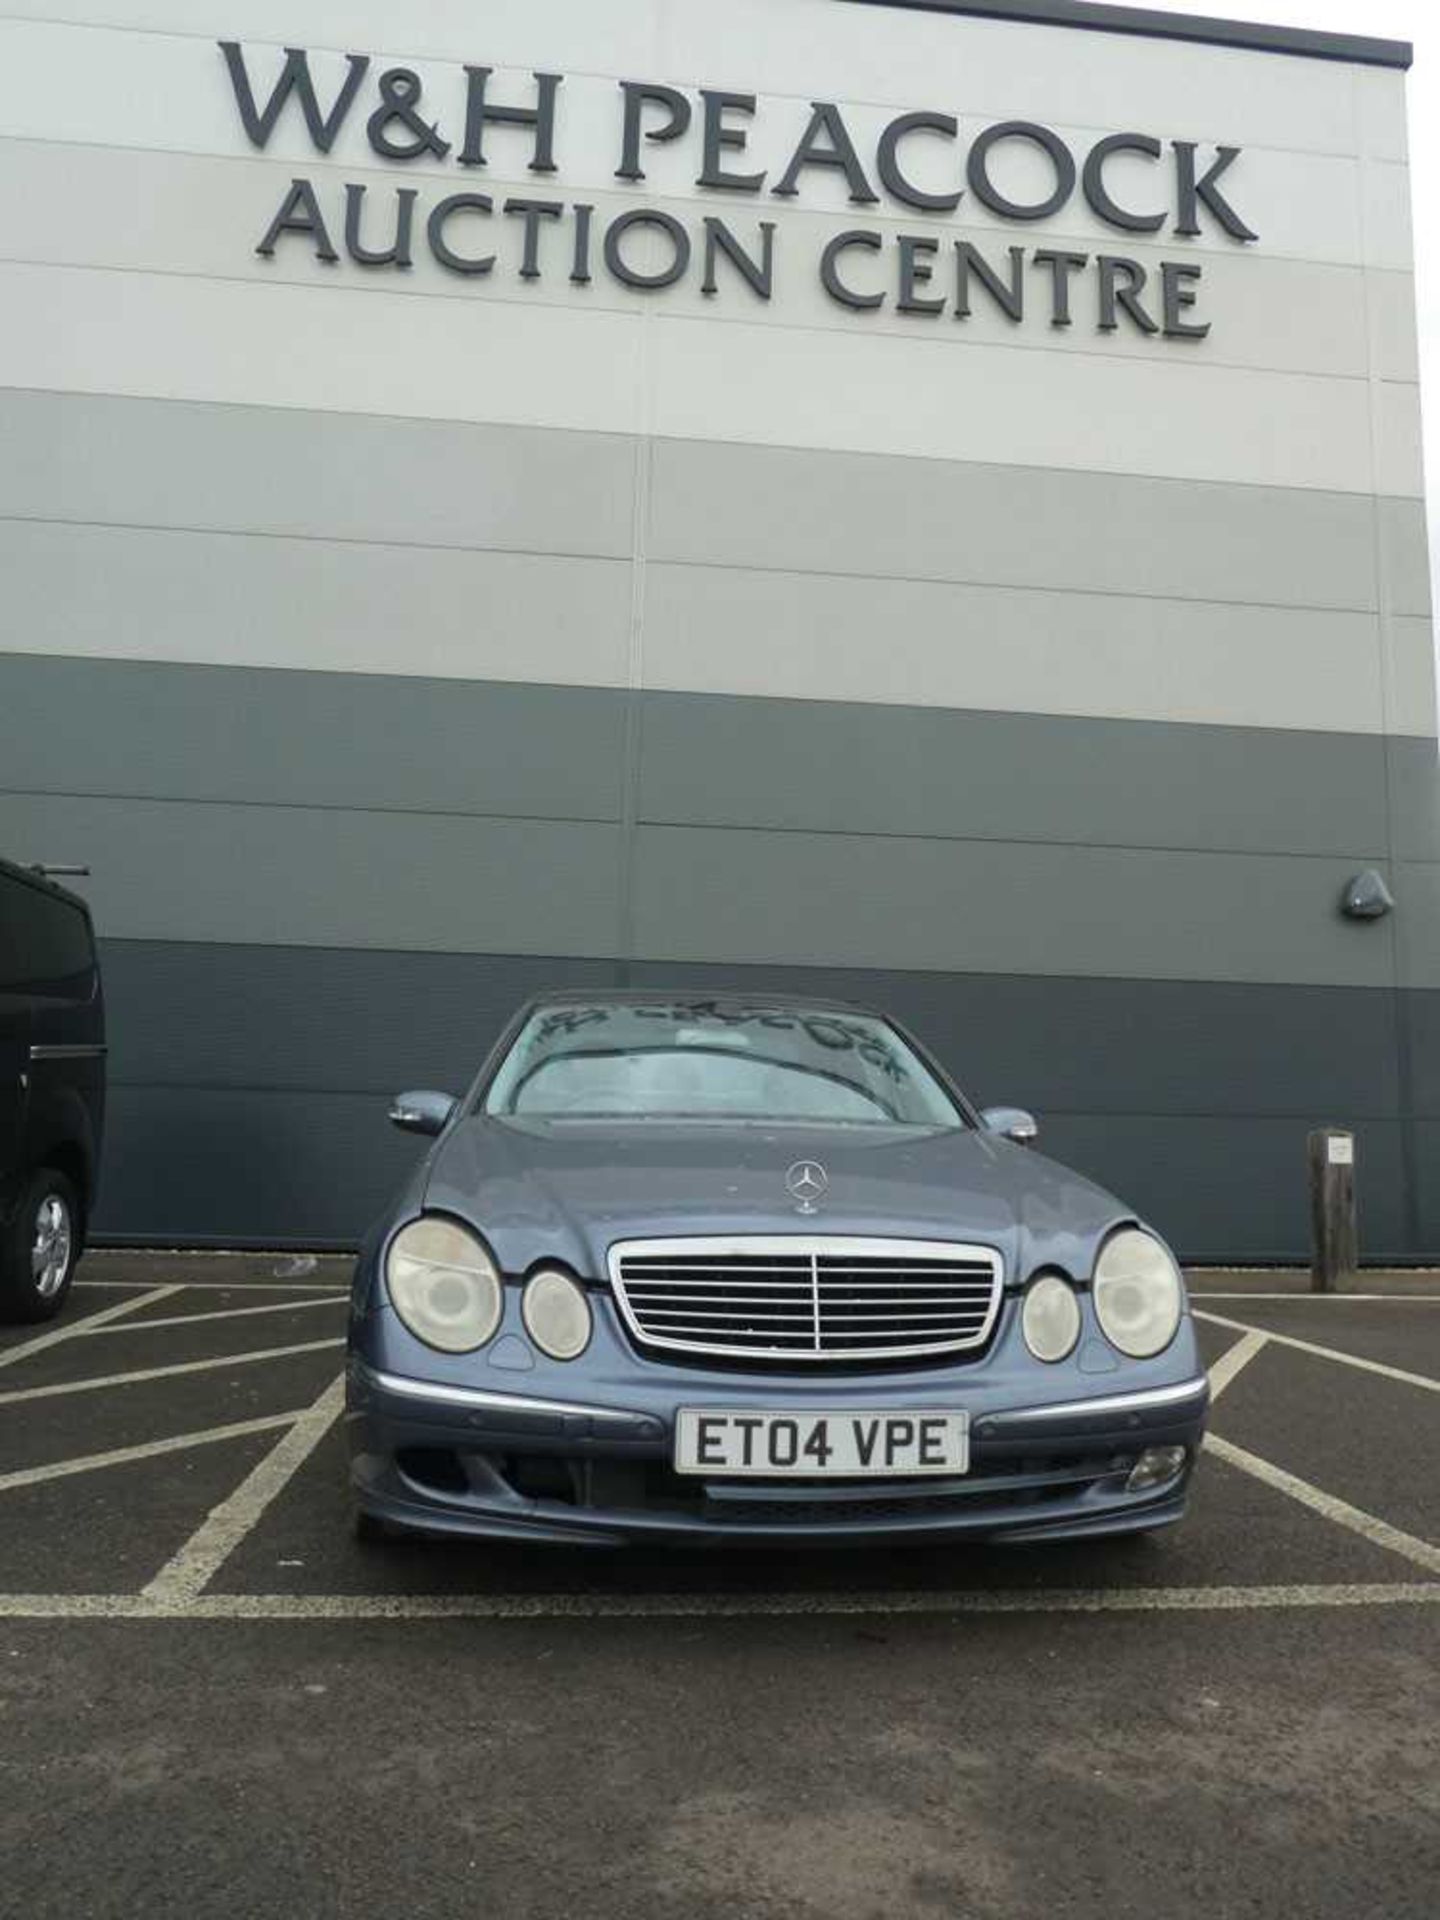 ET04 VPE (2004) Mercedes E240 Avantgarde Auto saloon, in blue, 2597cc, petrol, first registered 12/ - Image 2 of 14